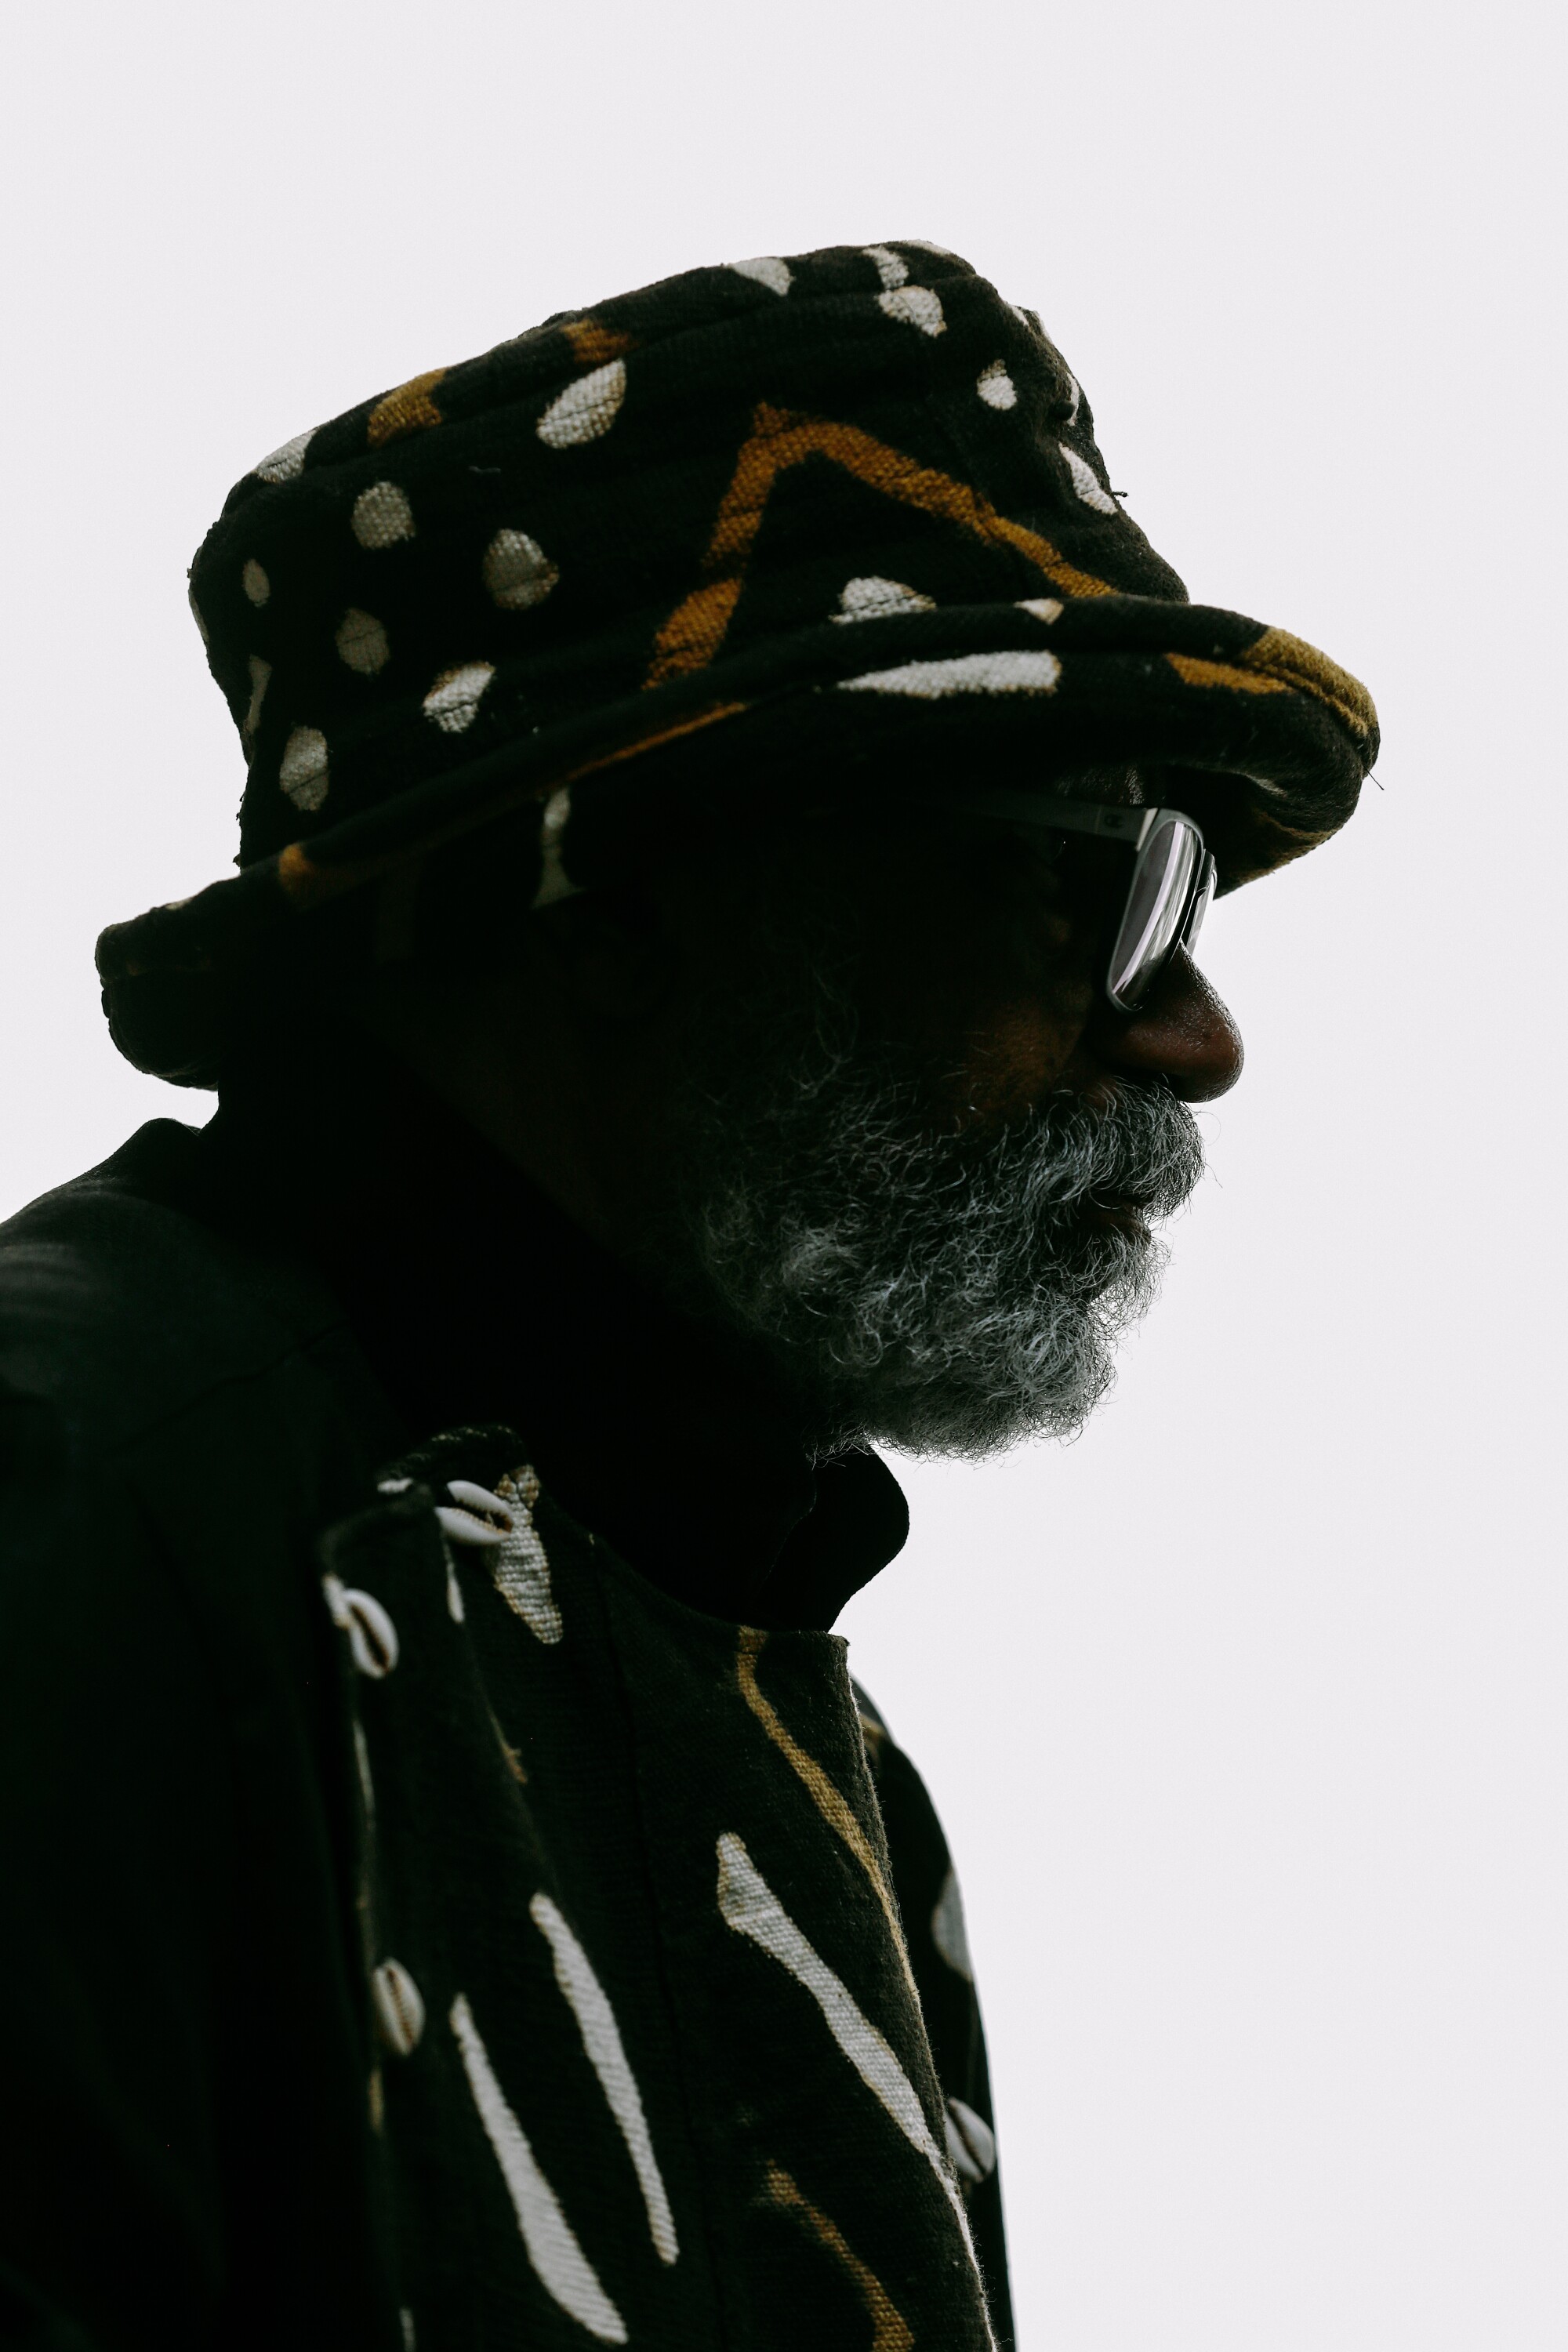 Artist Ulysses Jenkins is seen in profile wearing a patterned hat in dramatic contrast with a white background